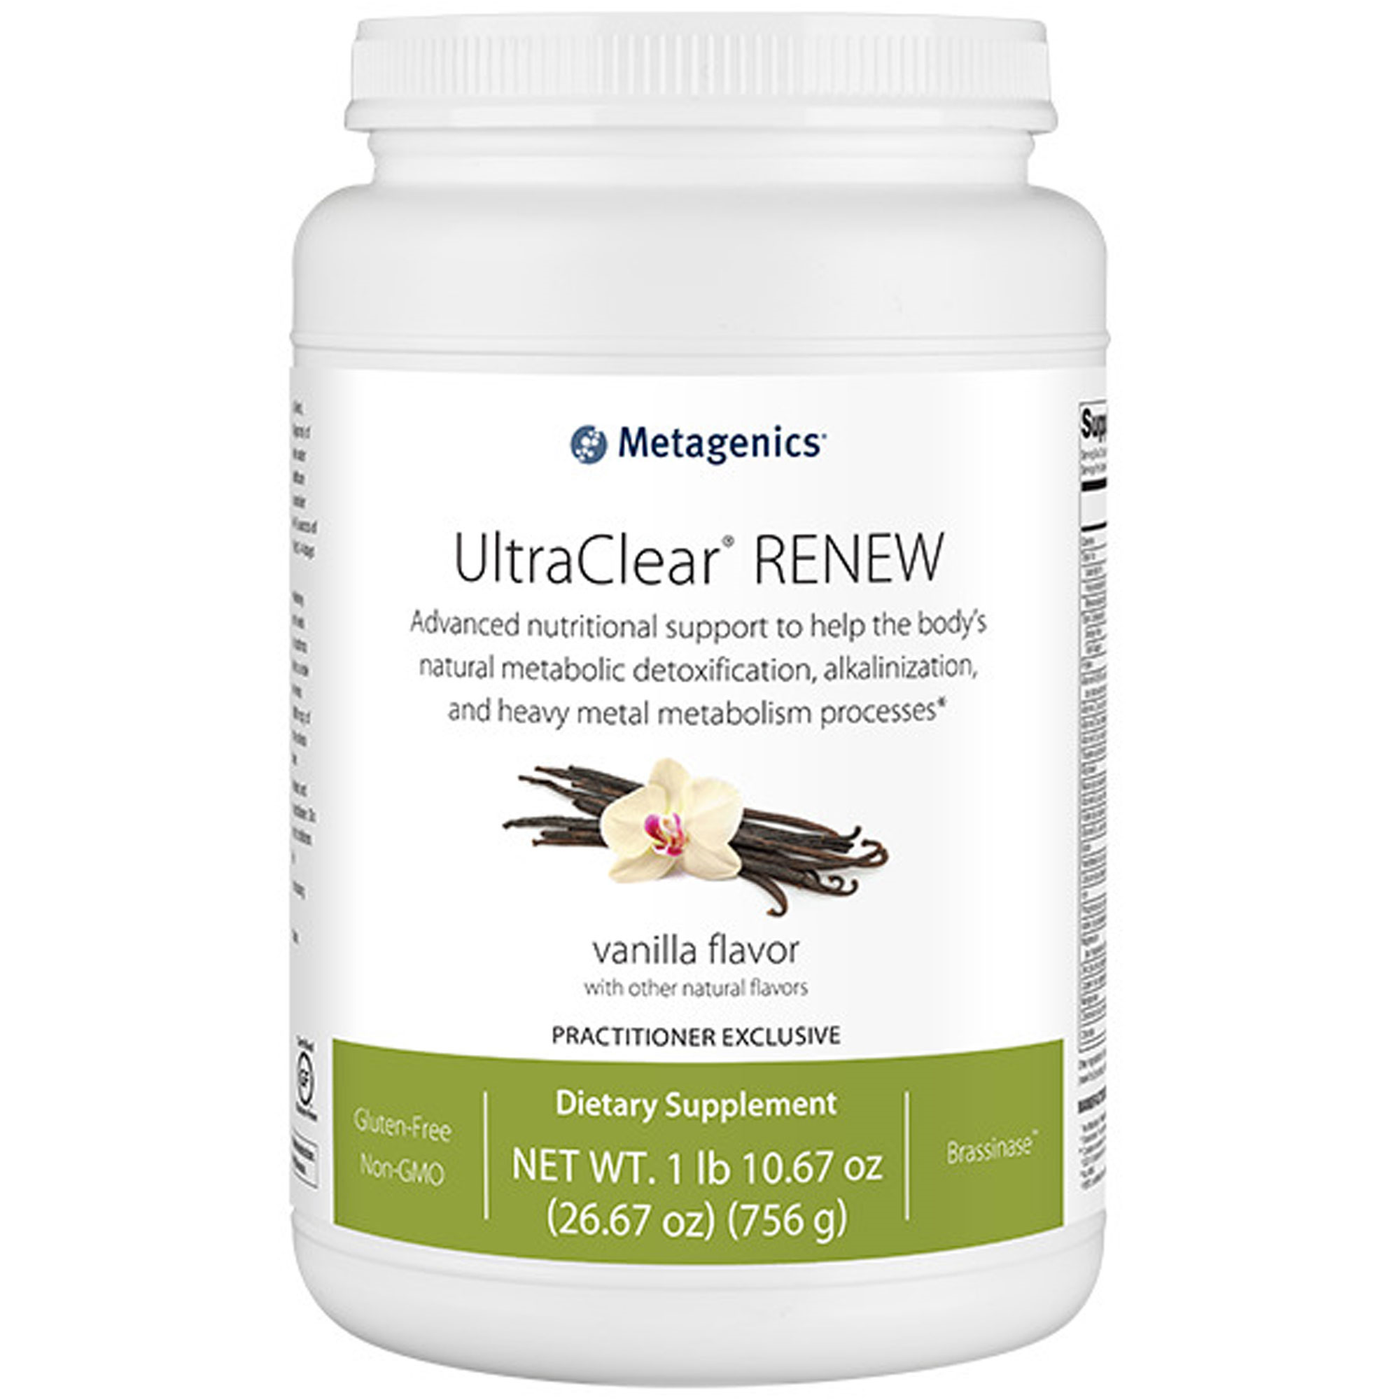 UltraClear RENEW Vanilla ings Curated Wellness